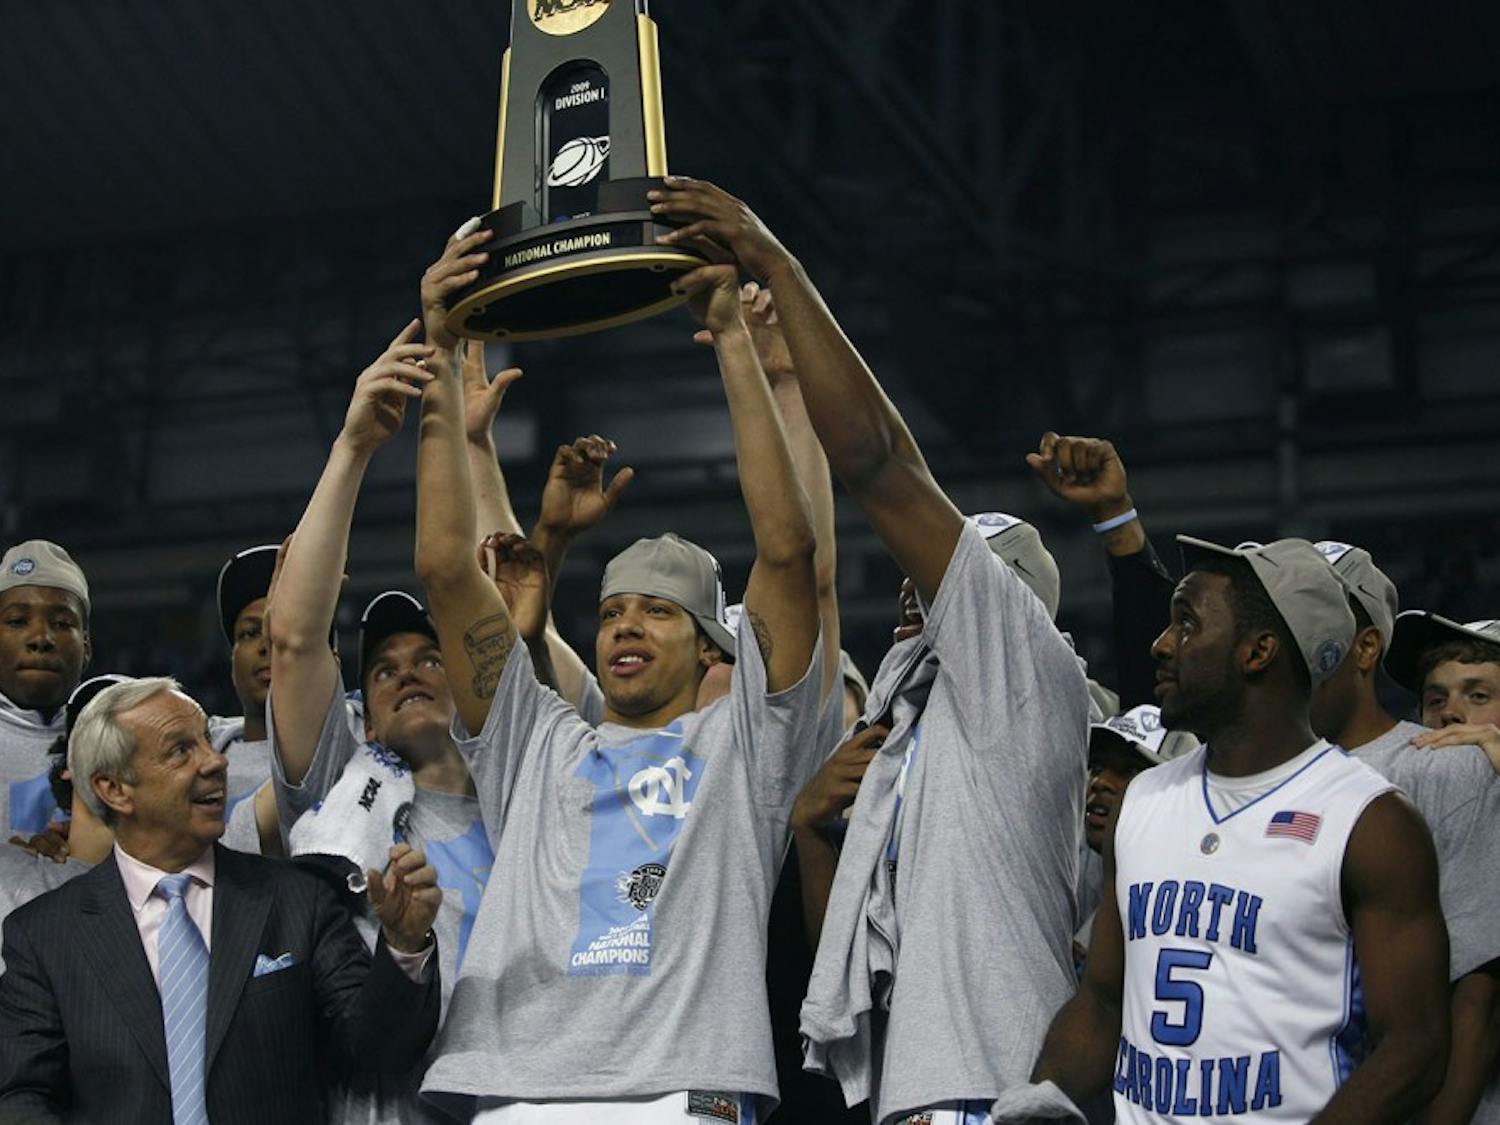 Danny Green raises the 2009 NCAA championship trophy with his team. Green has since gone on to win the NBA championship with the San Antonio Spurs.